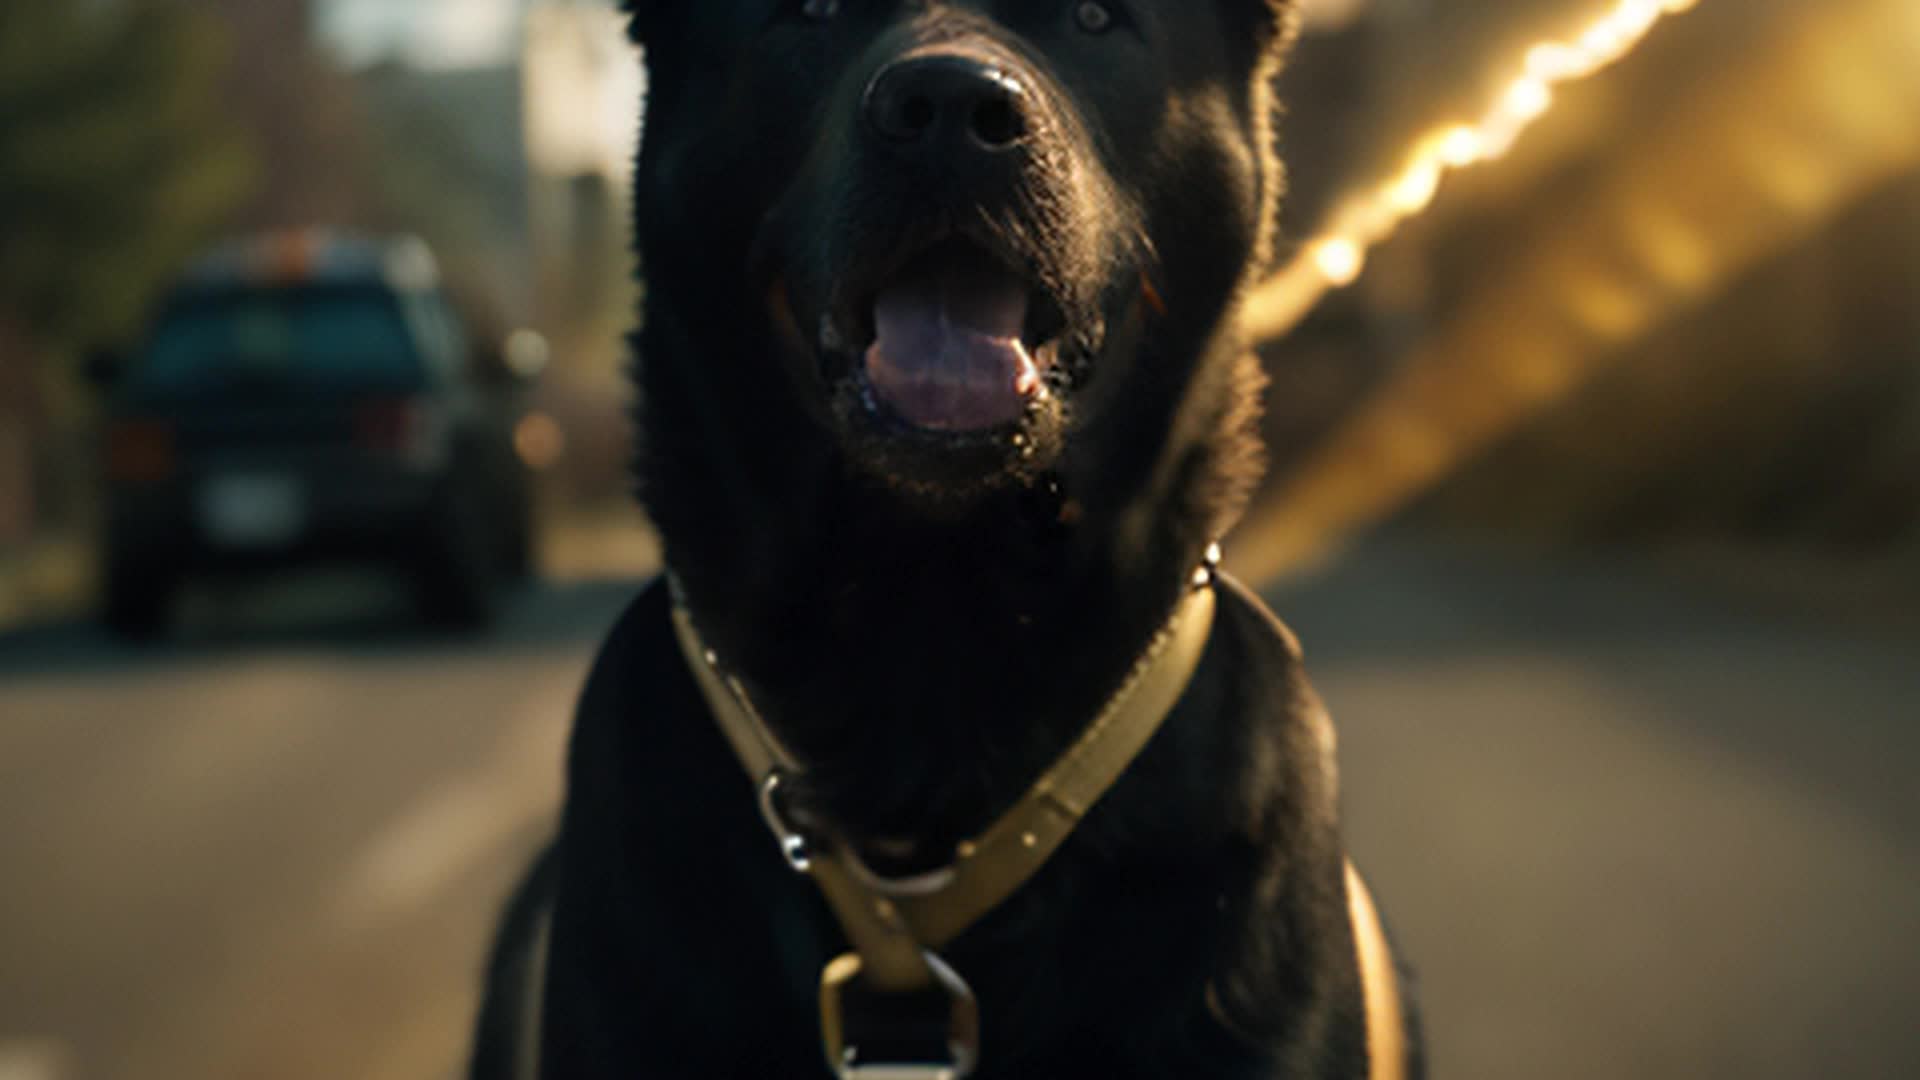 Black dog with gold belt fighting bear, intense action, dogs dad arrives, dramatic confrontation, dad dies, 10 years later, matured black dog, harnesses black power, fierce battle, defeats bear, victorious, dynamic camera angles, detailed and sharp focus, cinematic lighting, highenergy atmosphere, triumphant climax, rendered by octane